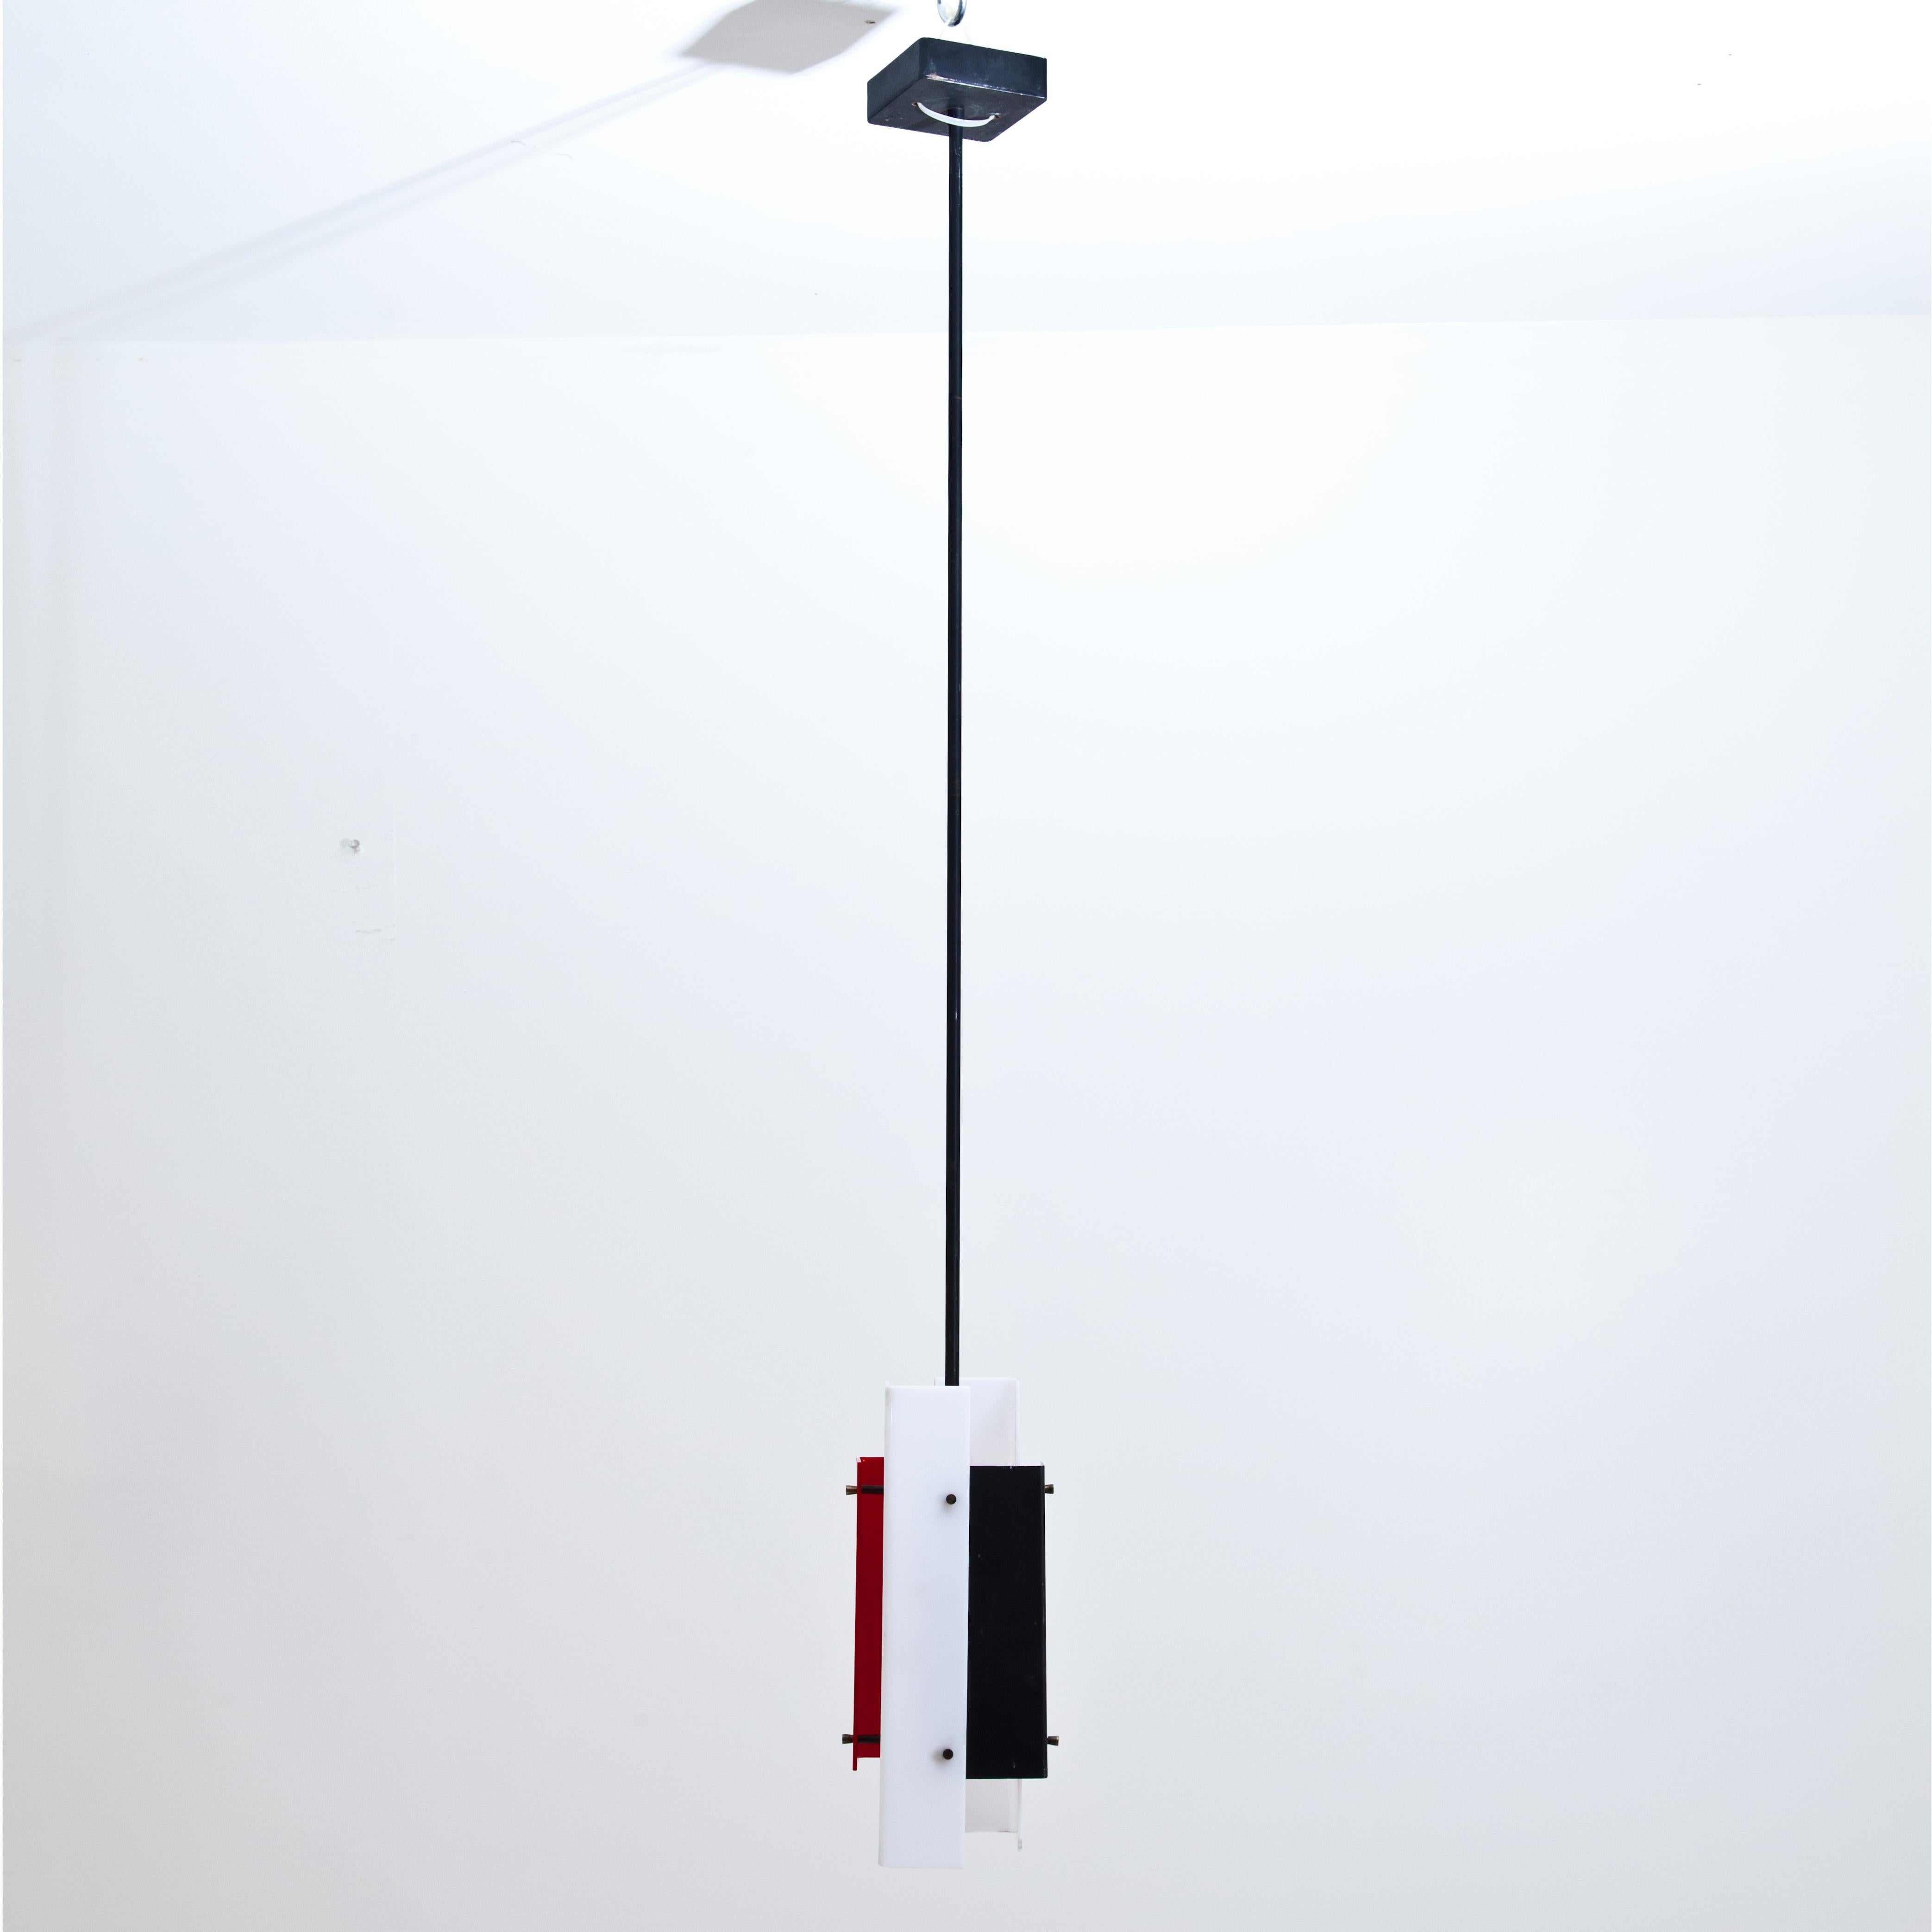 Set of three ceiling lights 315 by Jean Boris Lacroix for Luminalite. Pendant lamp with a black metal stem consisting of rectangular shades of acrylic in white, red and black. 3 pendants in the set. Lit: Clémence & Didier Krzentowski: The Complete